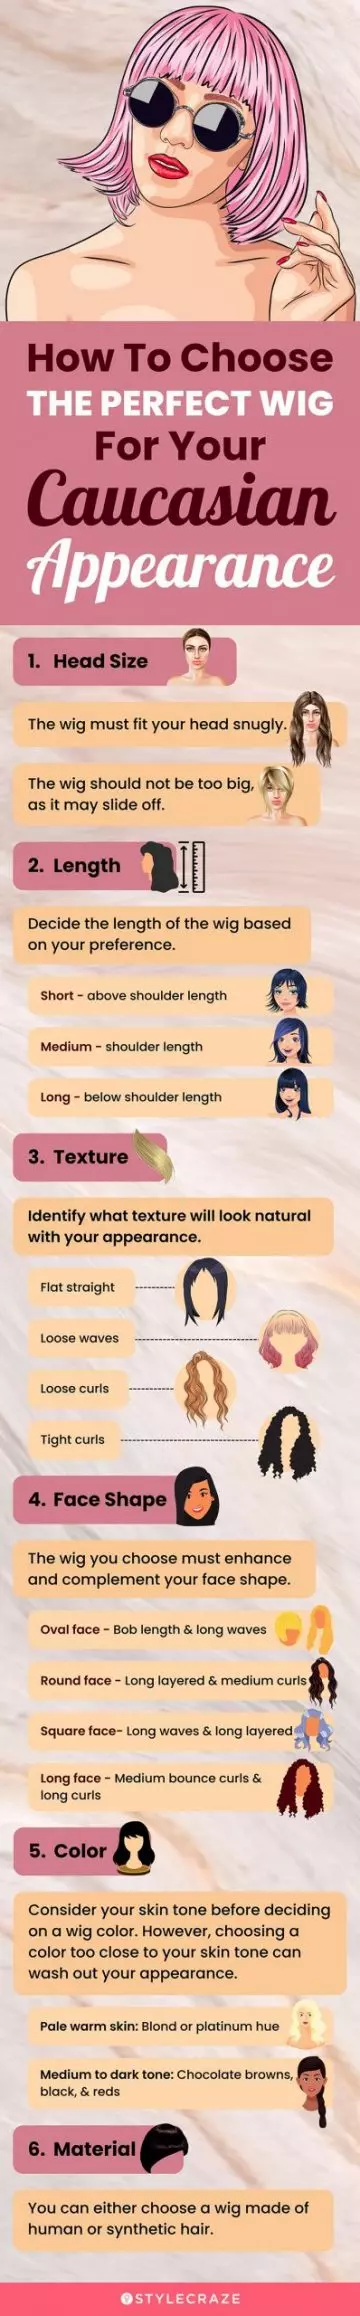 How To Choose The Perfect Wig For Your Caucasian Appearance